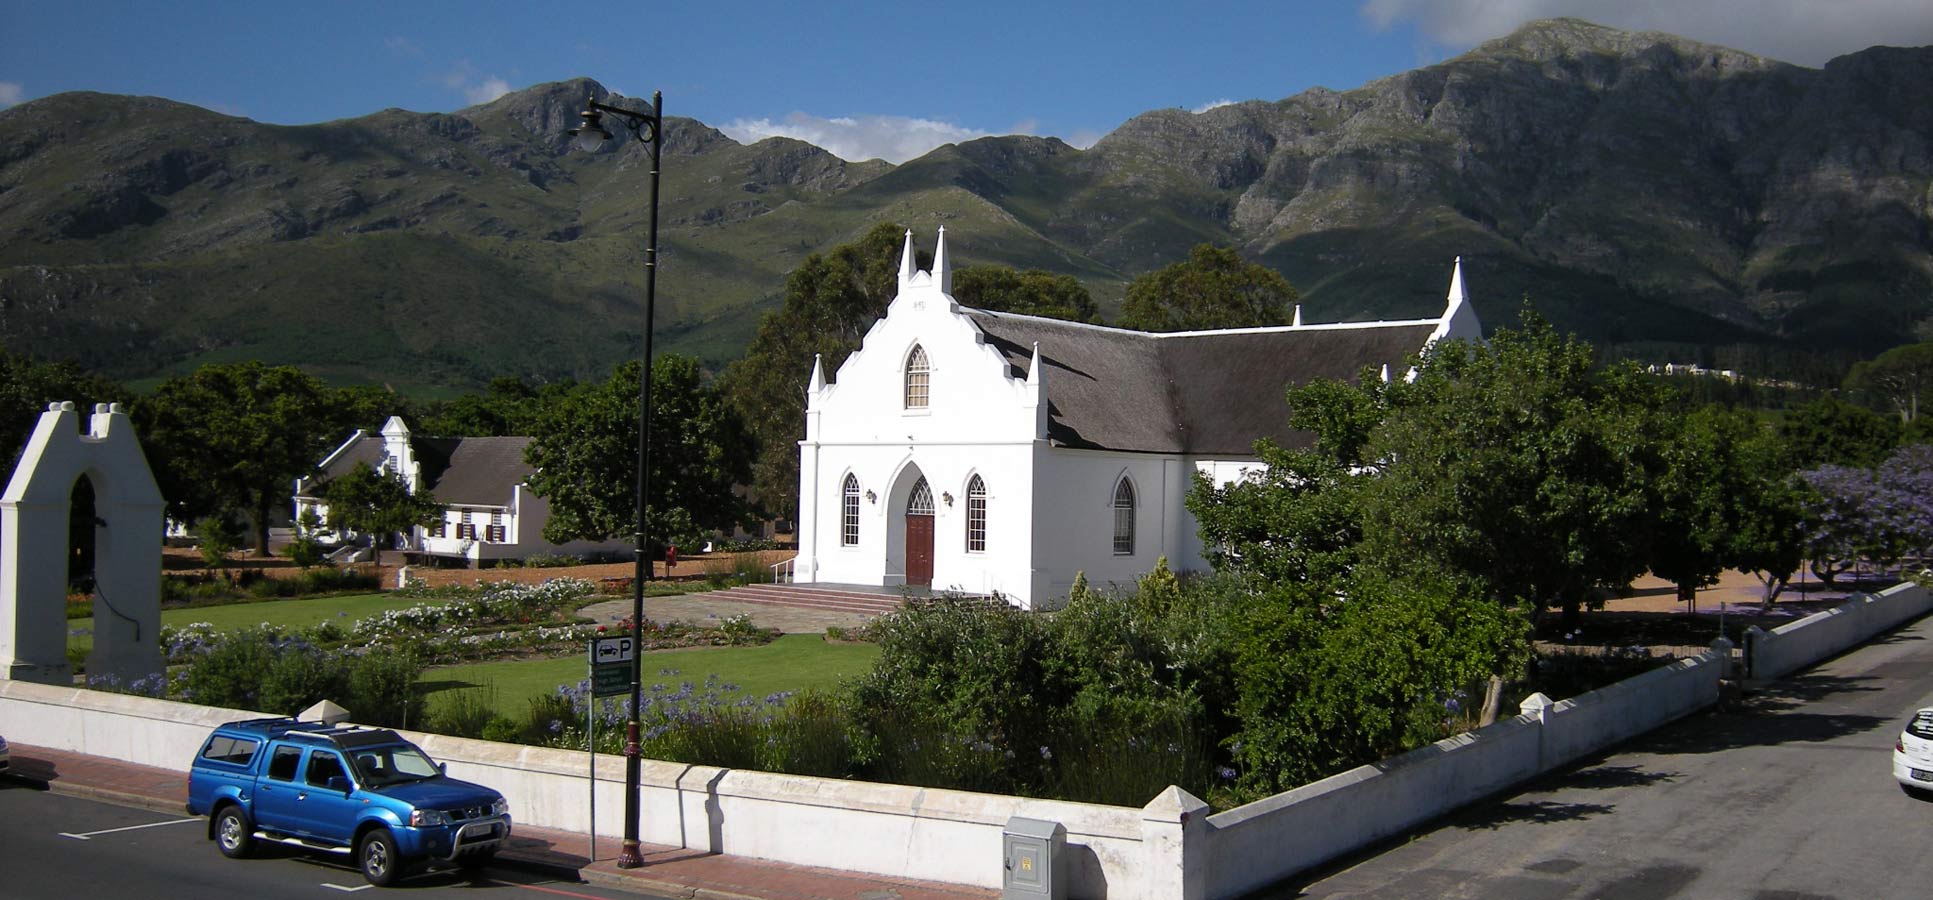 Travel Jimmy travel reviews Franschhoek South Africa